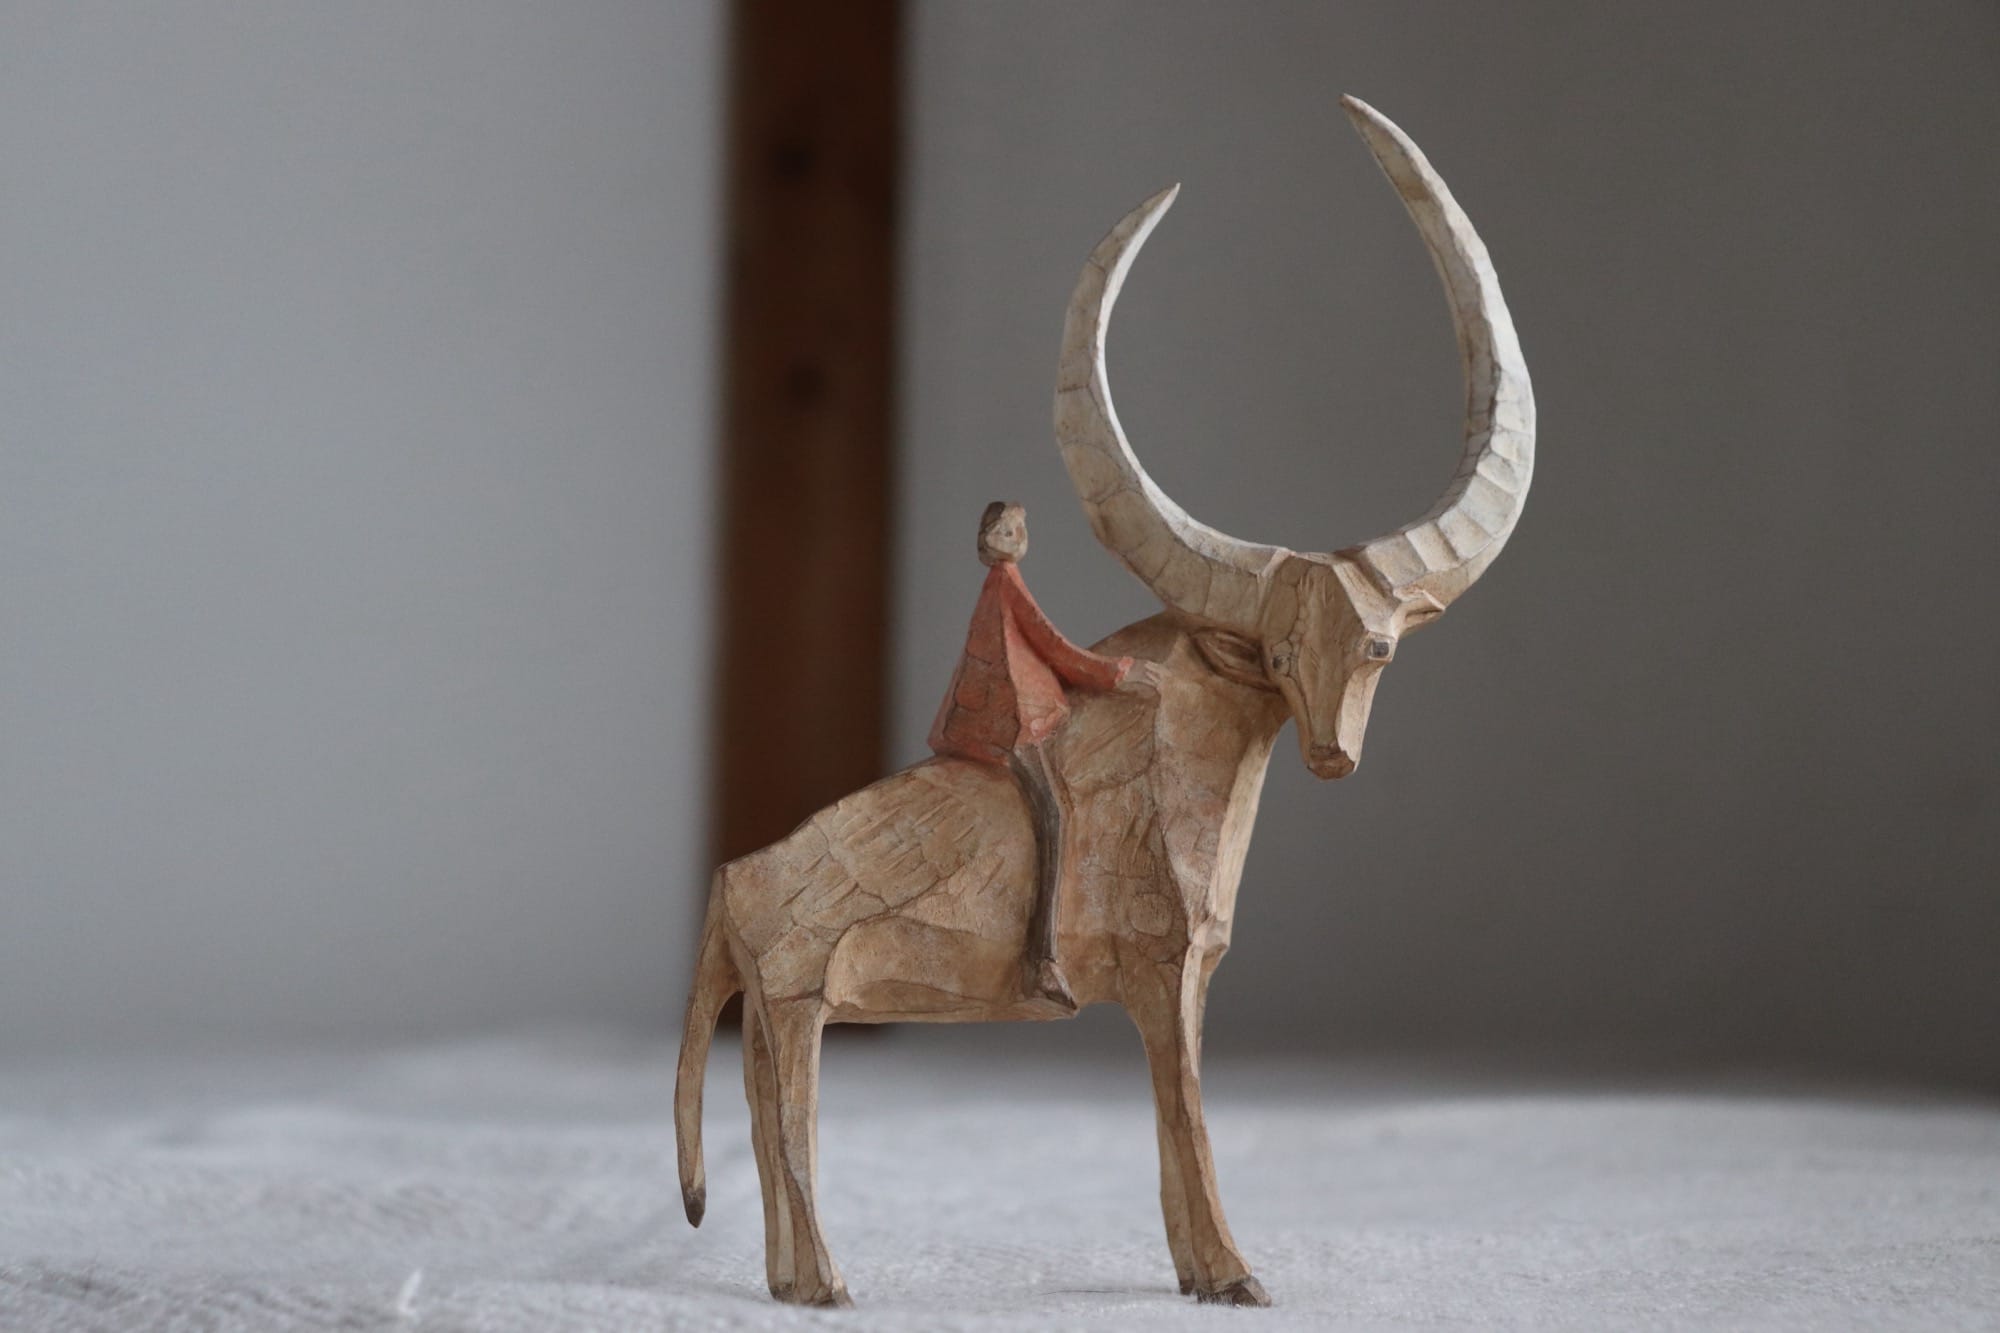 a wooden sculpture of a small figure on the back of a long-horned cow